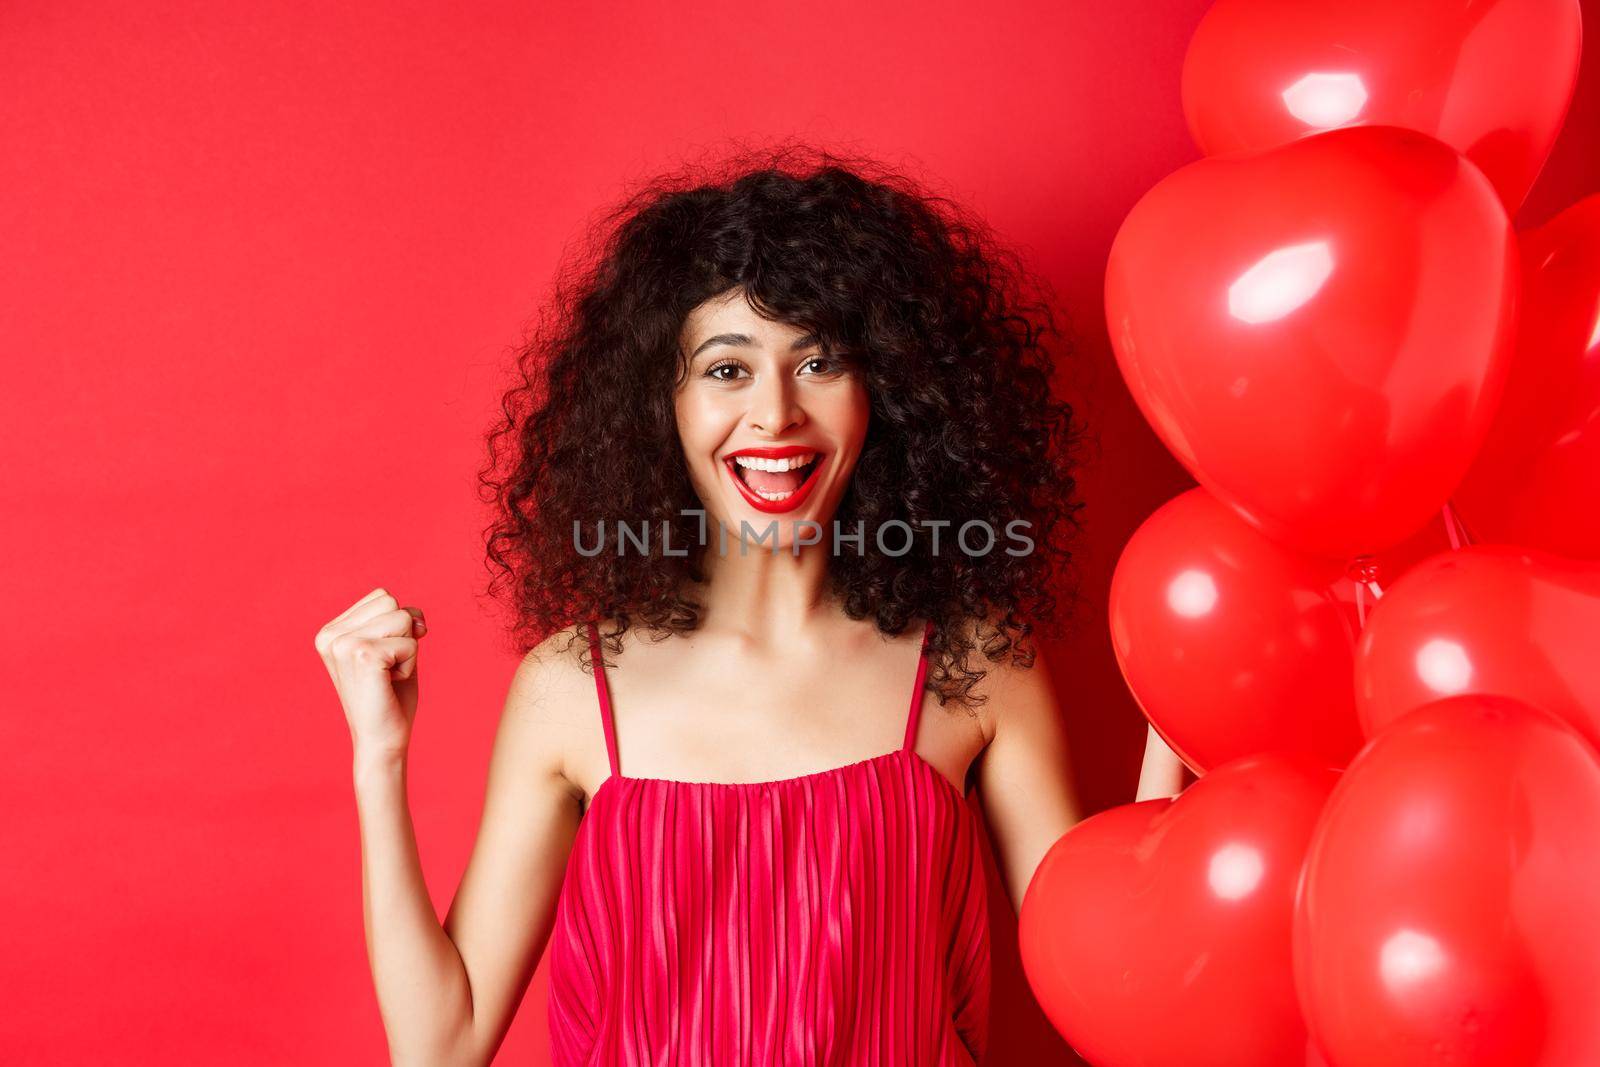 Excited pretty woman winning, say yes and smiling, celebrating success, making fist pump motivated, standing near heart balloons and red background.